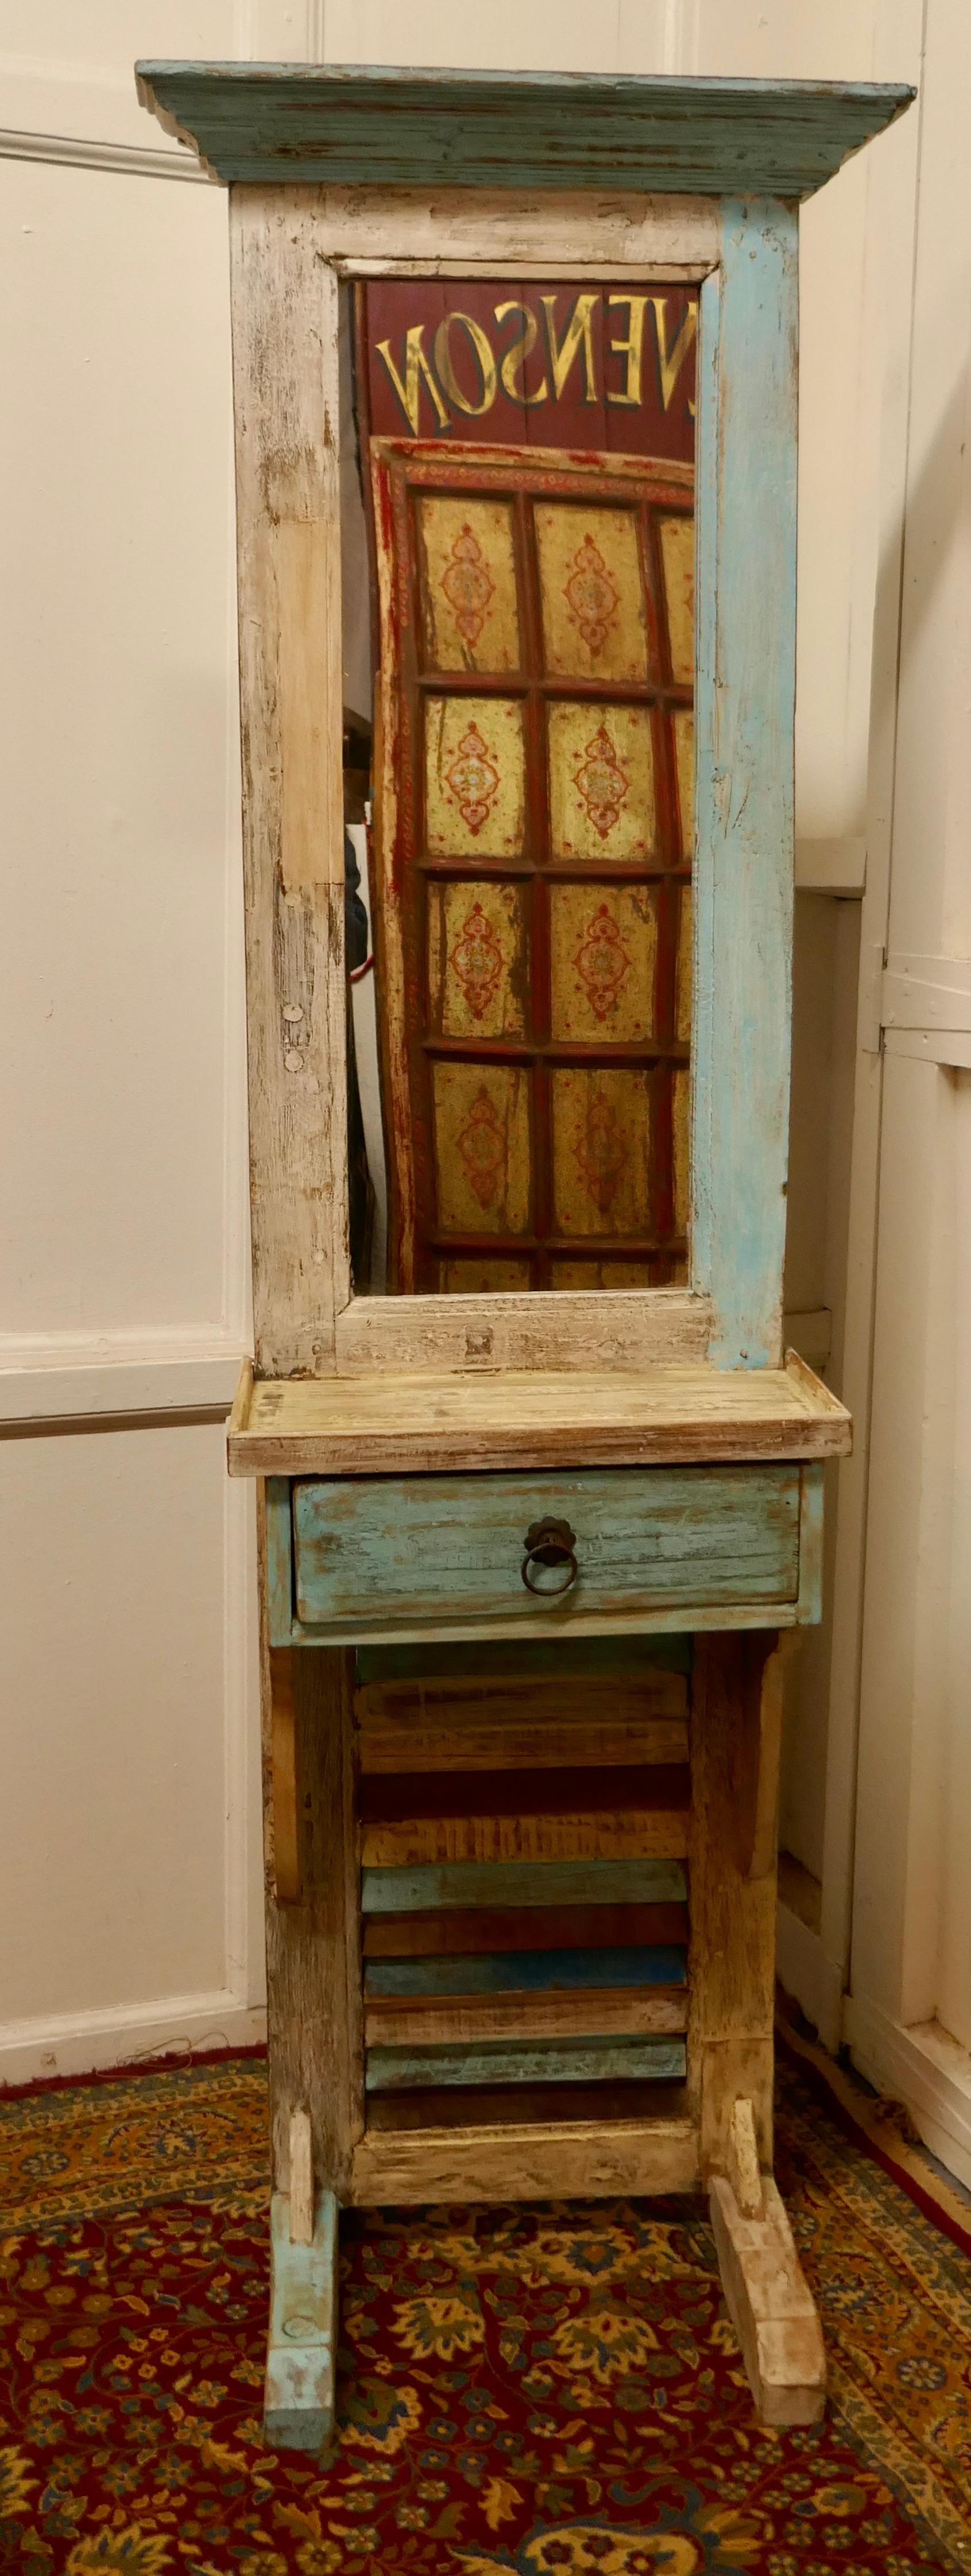 Painted French bathroom or cloakroom mirror stand

This is an unusual piece, it is made using a tall narrow window shutter
The stand has a long mirror in the centre and beneath this a small counter with a drawers below
This piece is shabby